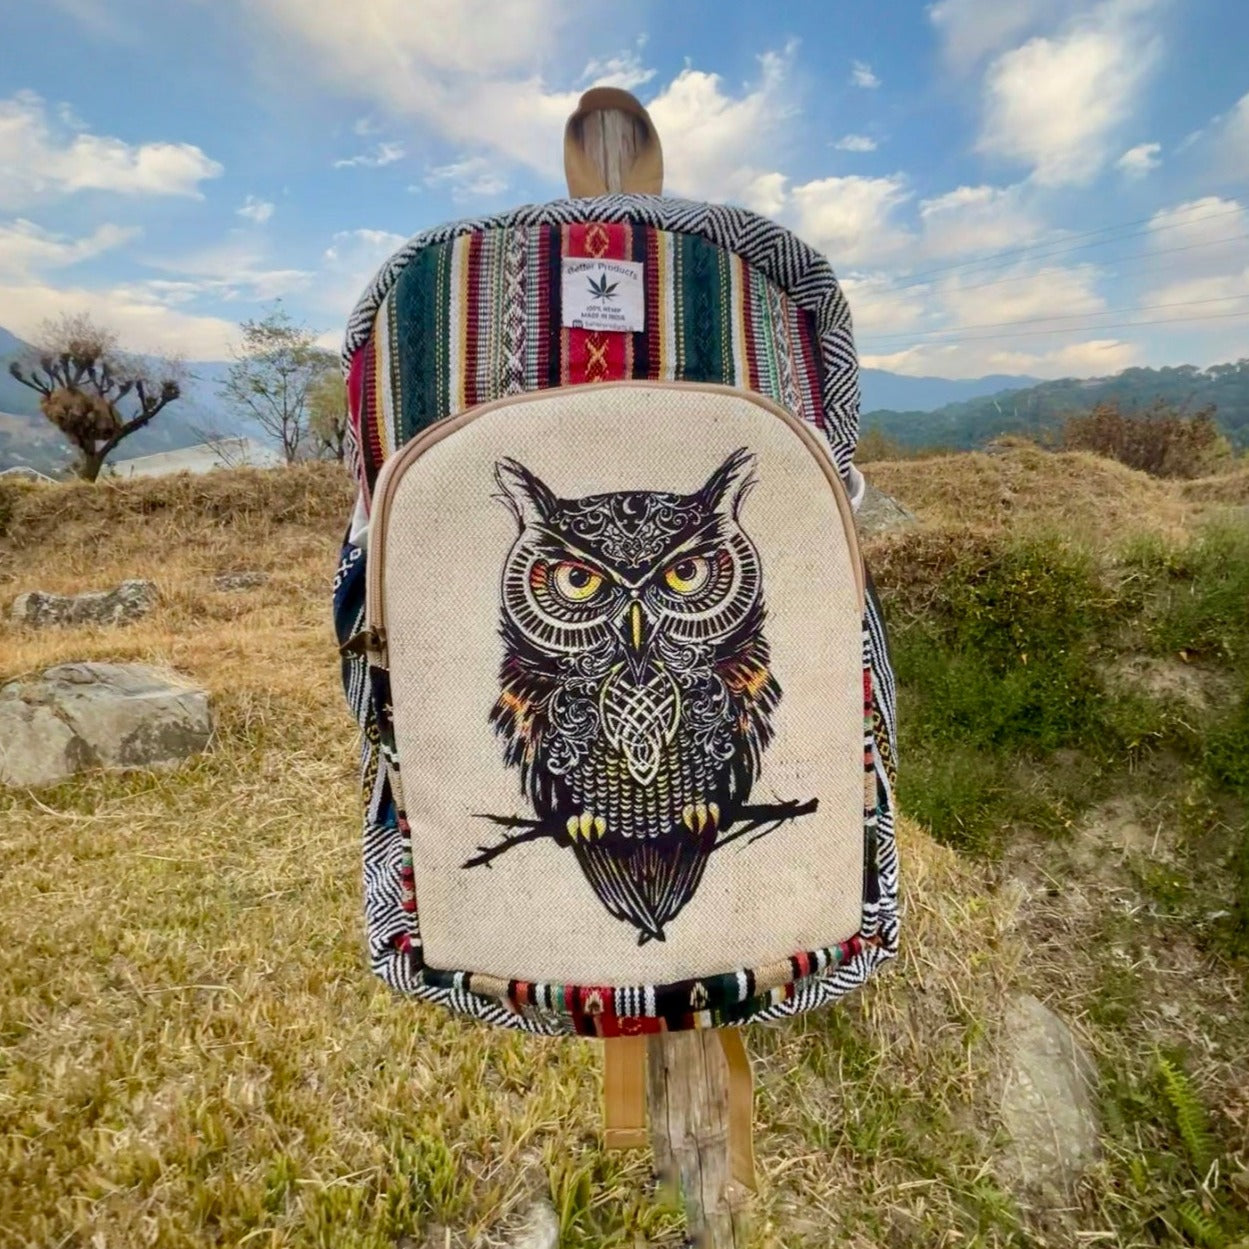 3-D HIMALAYAN OWL HEMP BACKPACK - 48 L Laptop Office/School/Travel Backpack- Fits Up to 17.3 Inch Laptop Notebook (Both Male and Female)